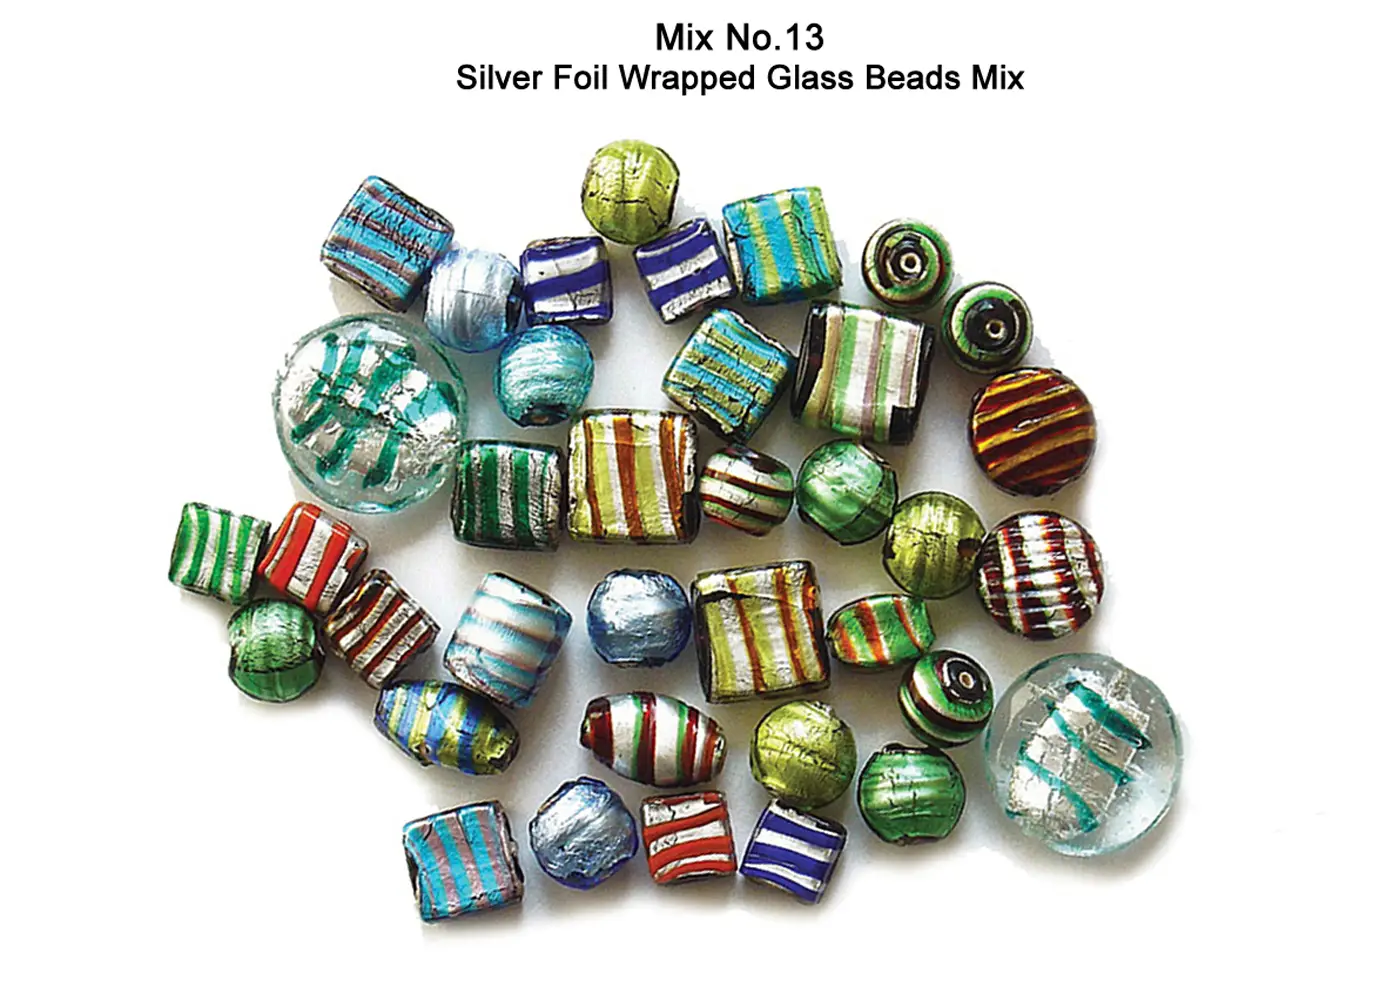 Silver Foil Wrapped Glass Beads Mix